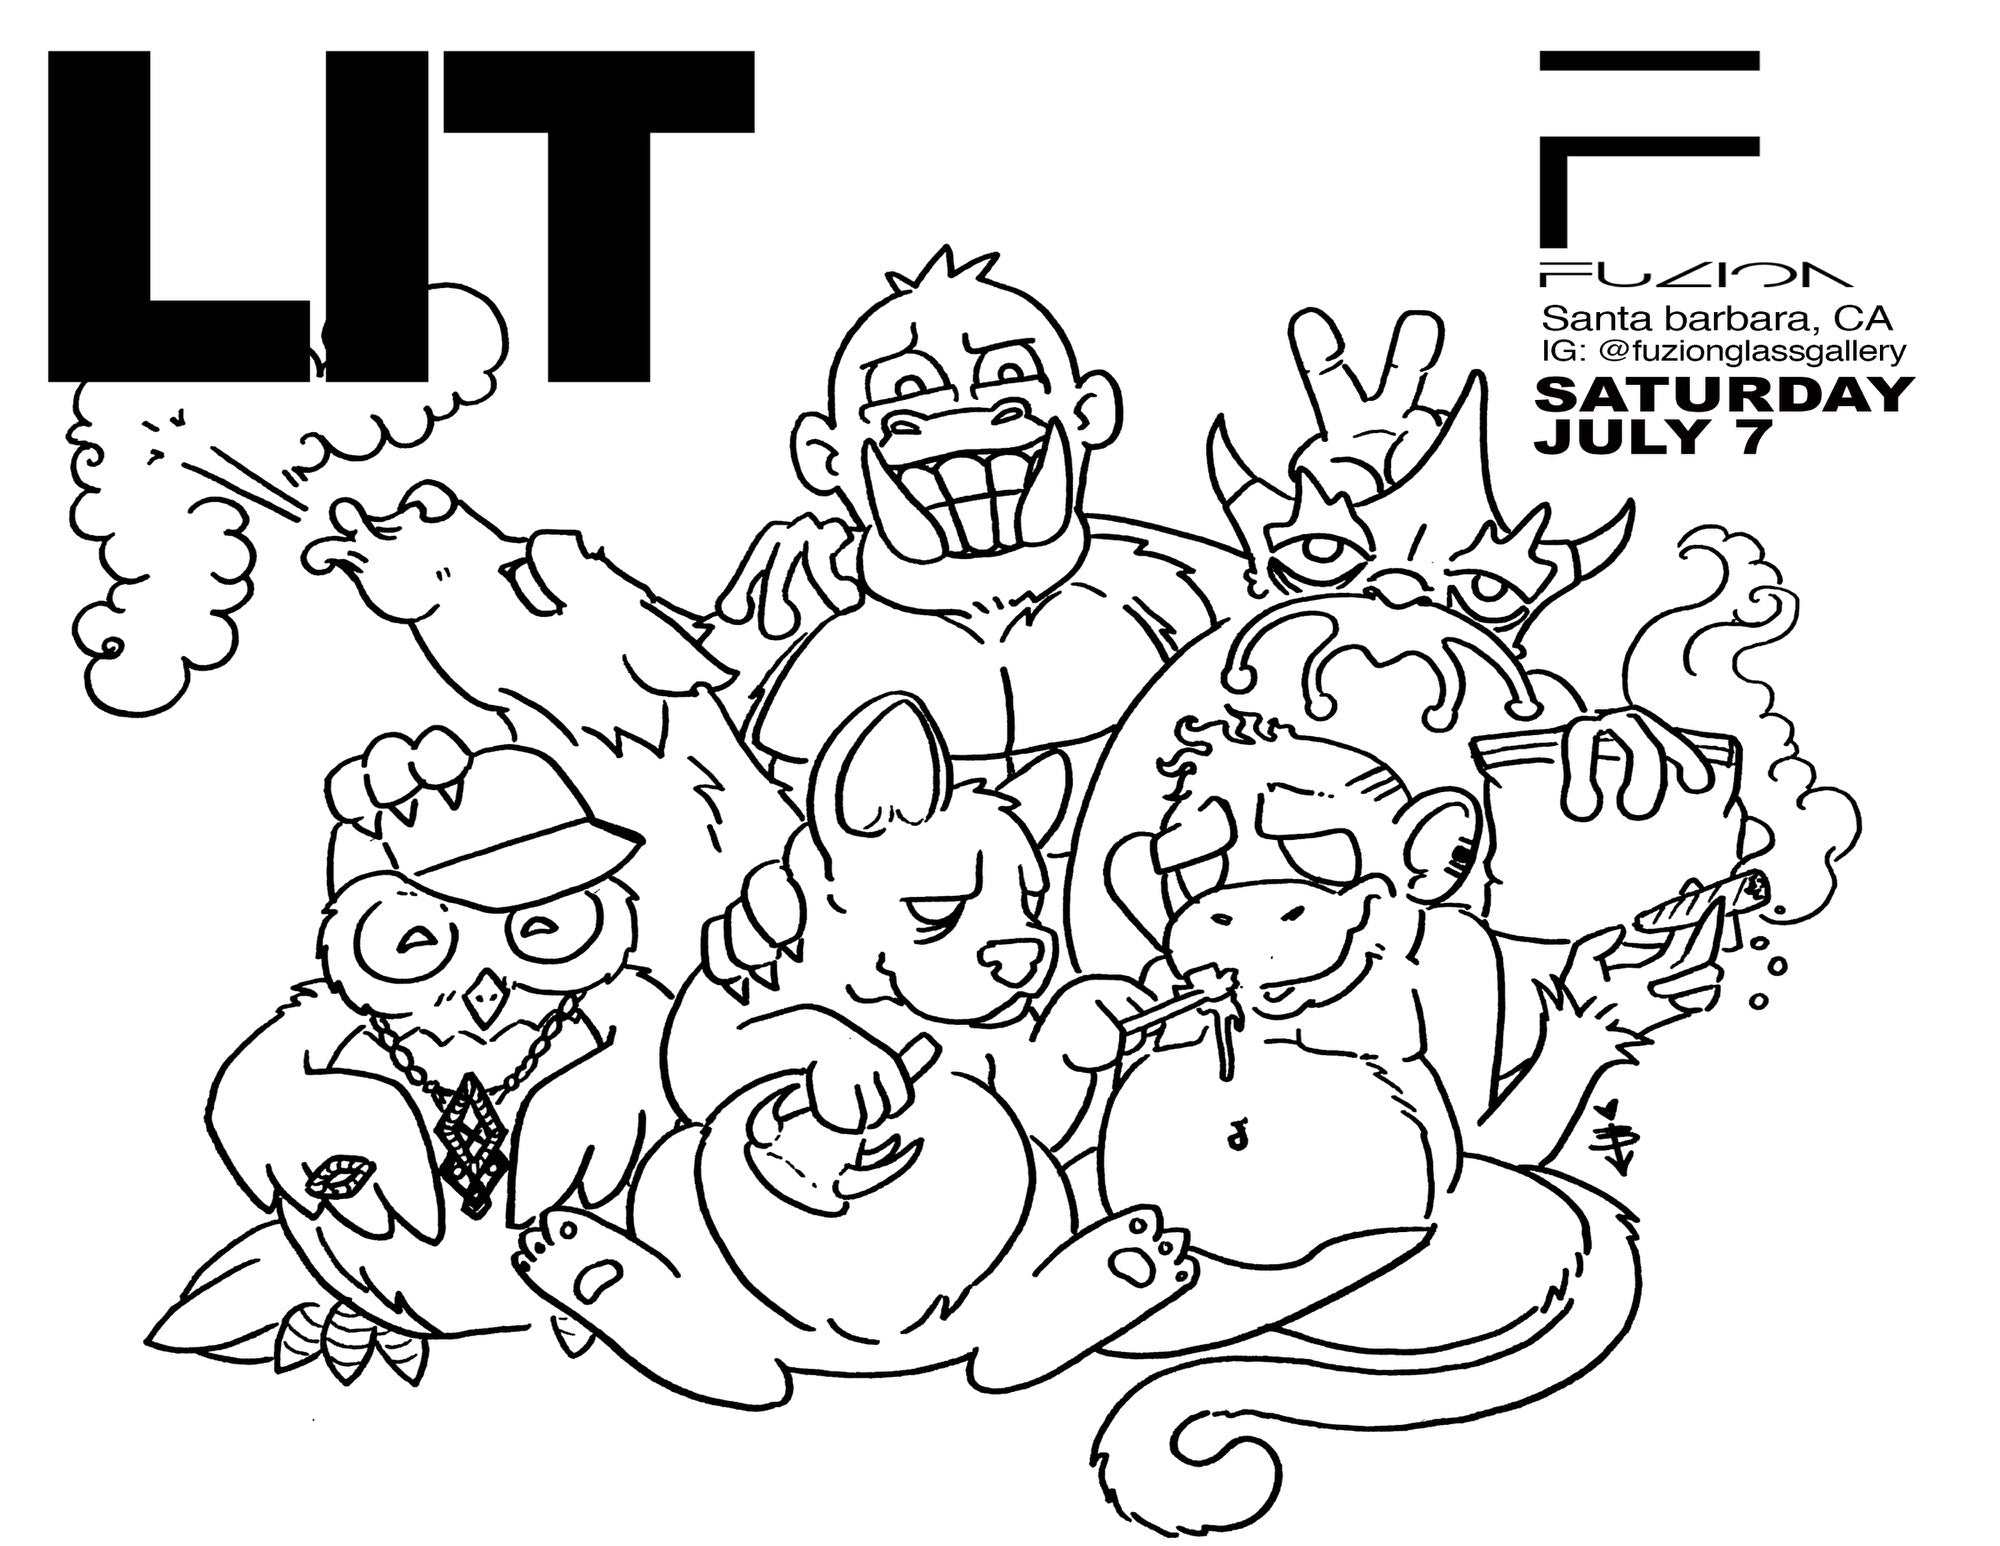 LIT Show coloring Contest Artwork by Brittney Monster